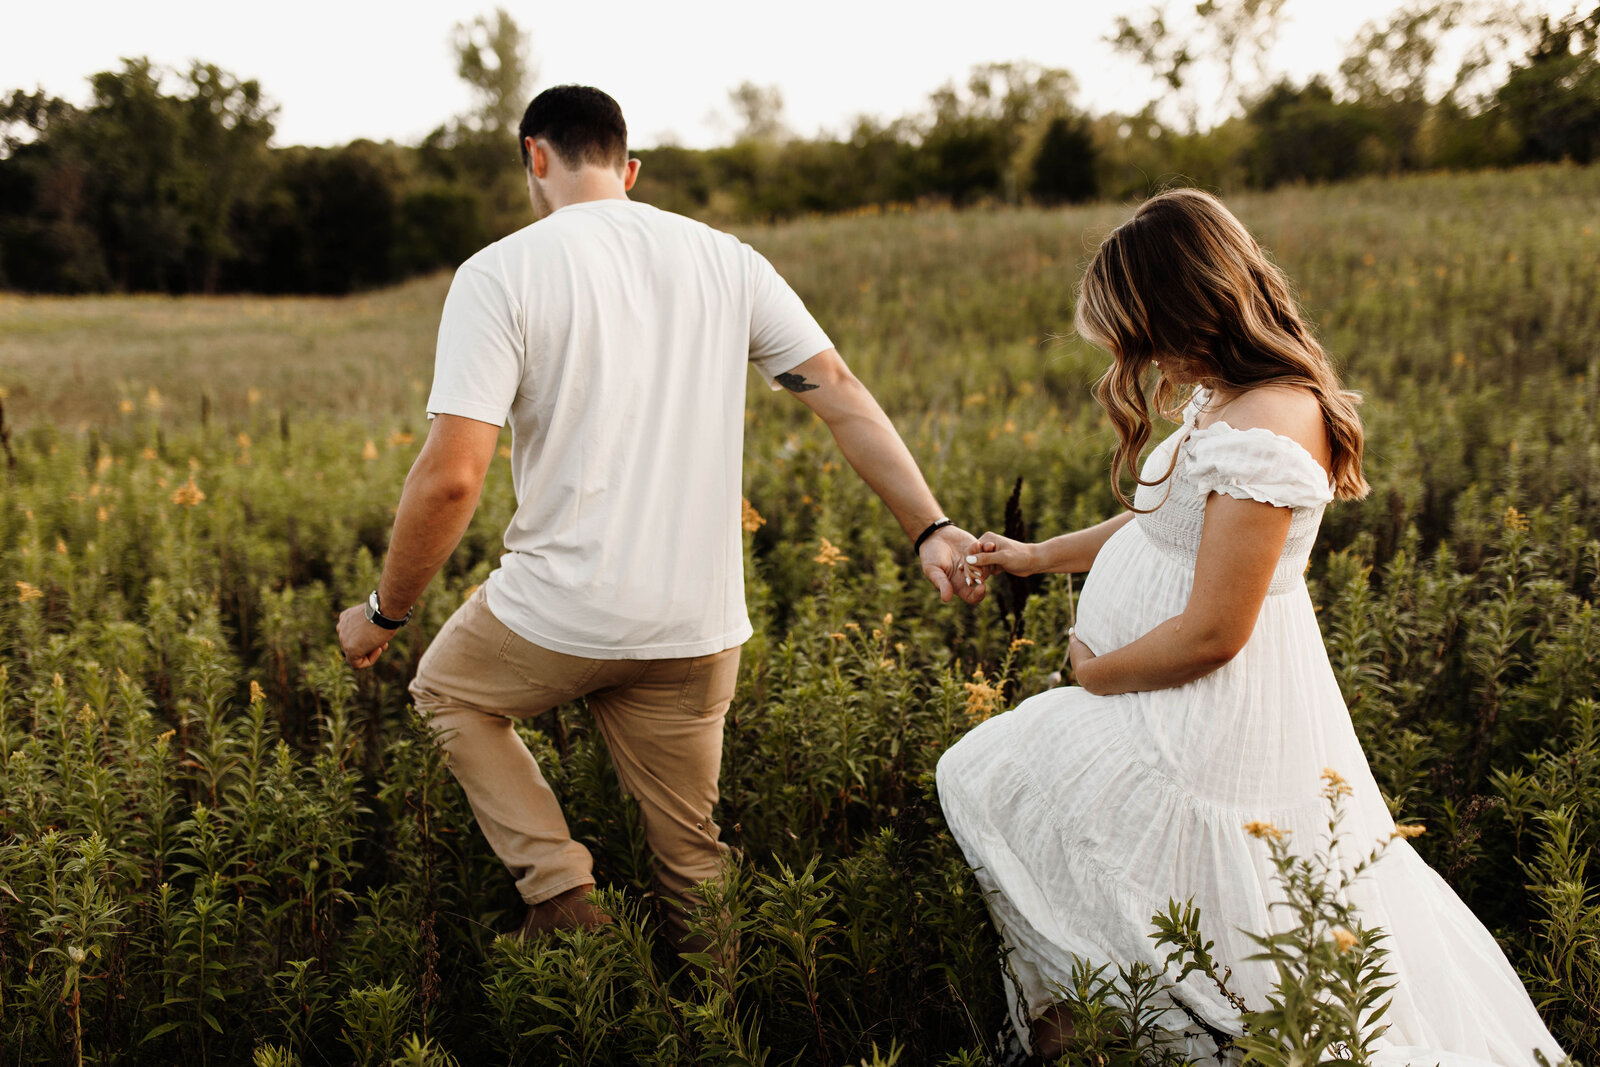 Couple holding hands and walking through a field while the woman holds her pregnant belly